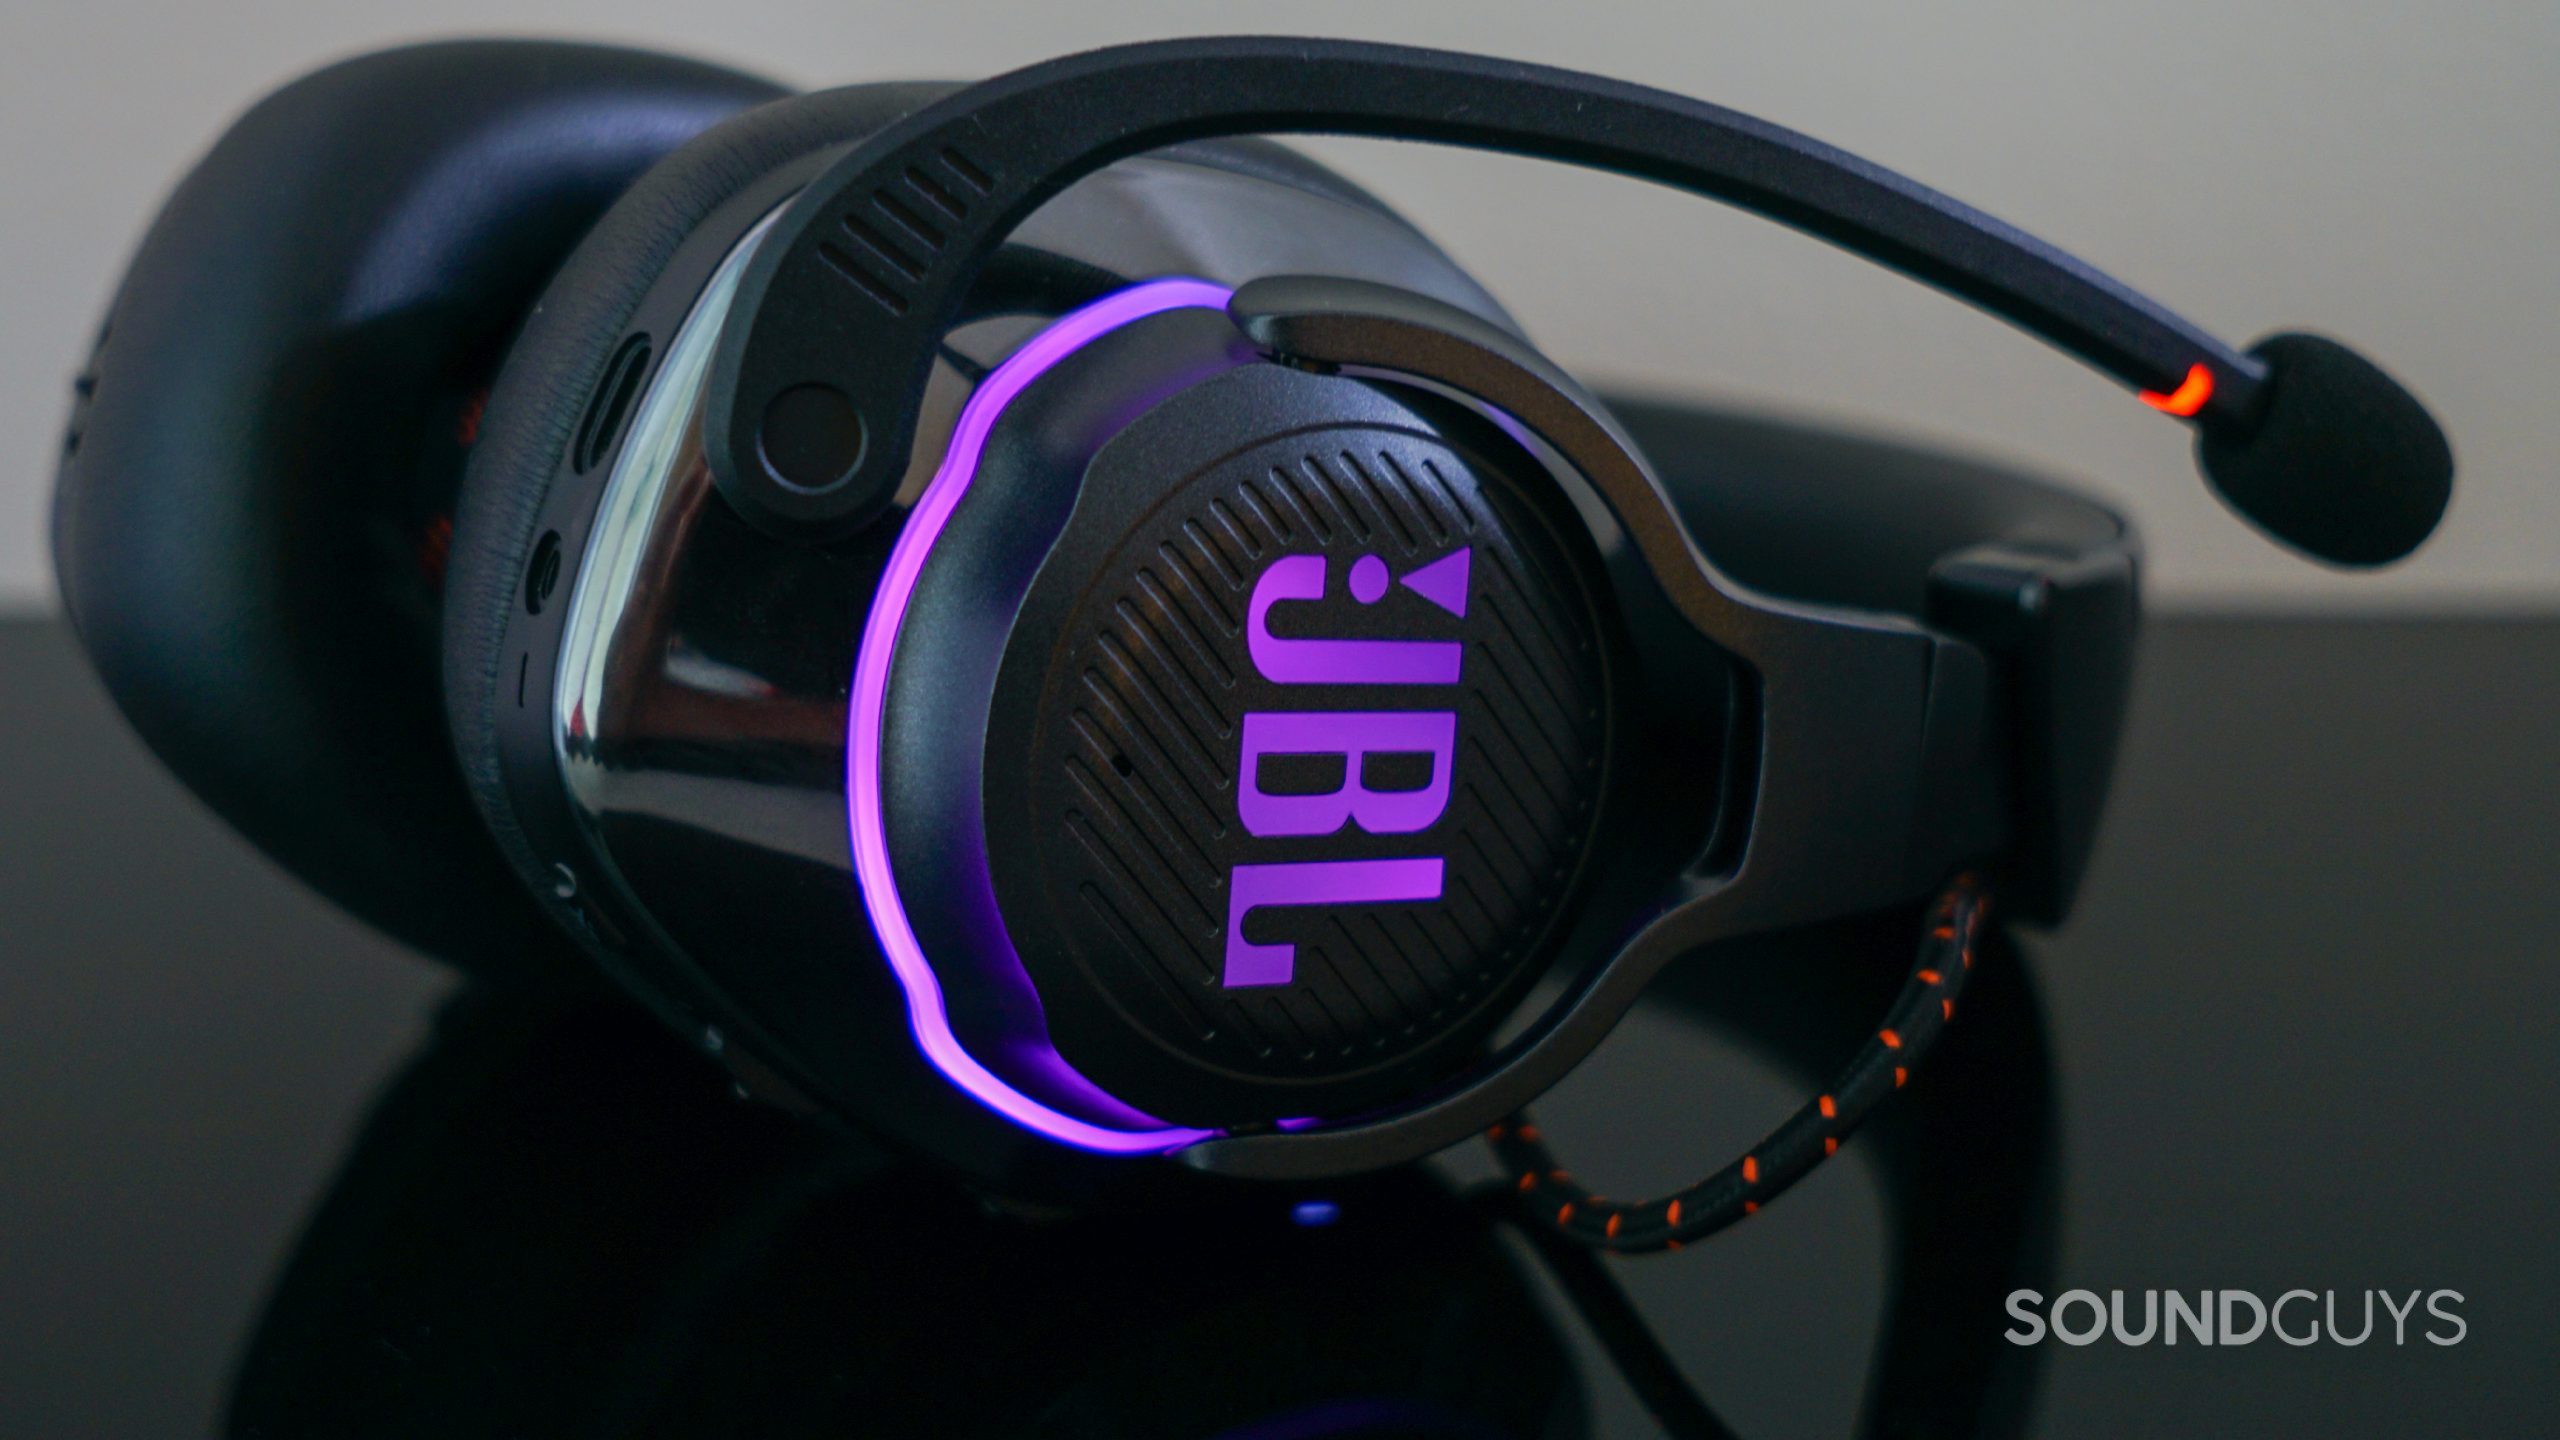 The JBL Quantum 800 gaming headset lays on a black reflective surface